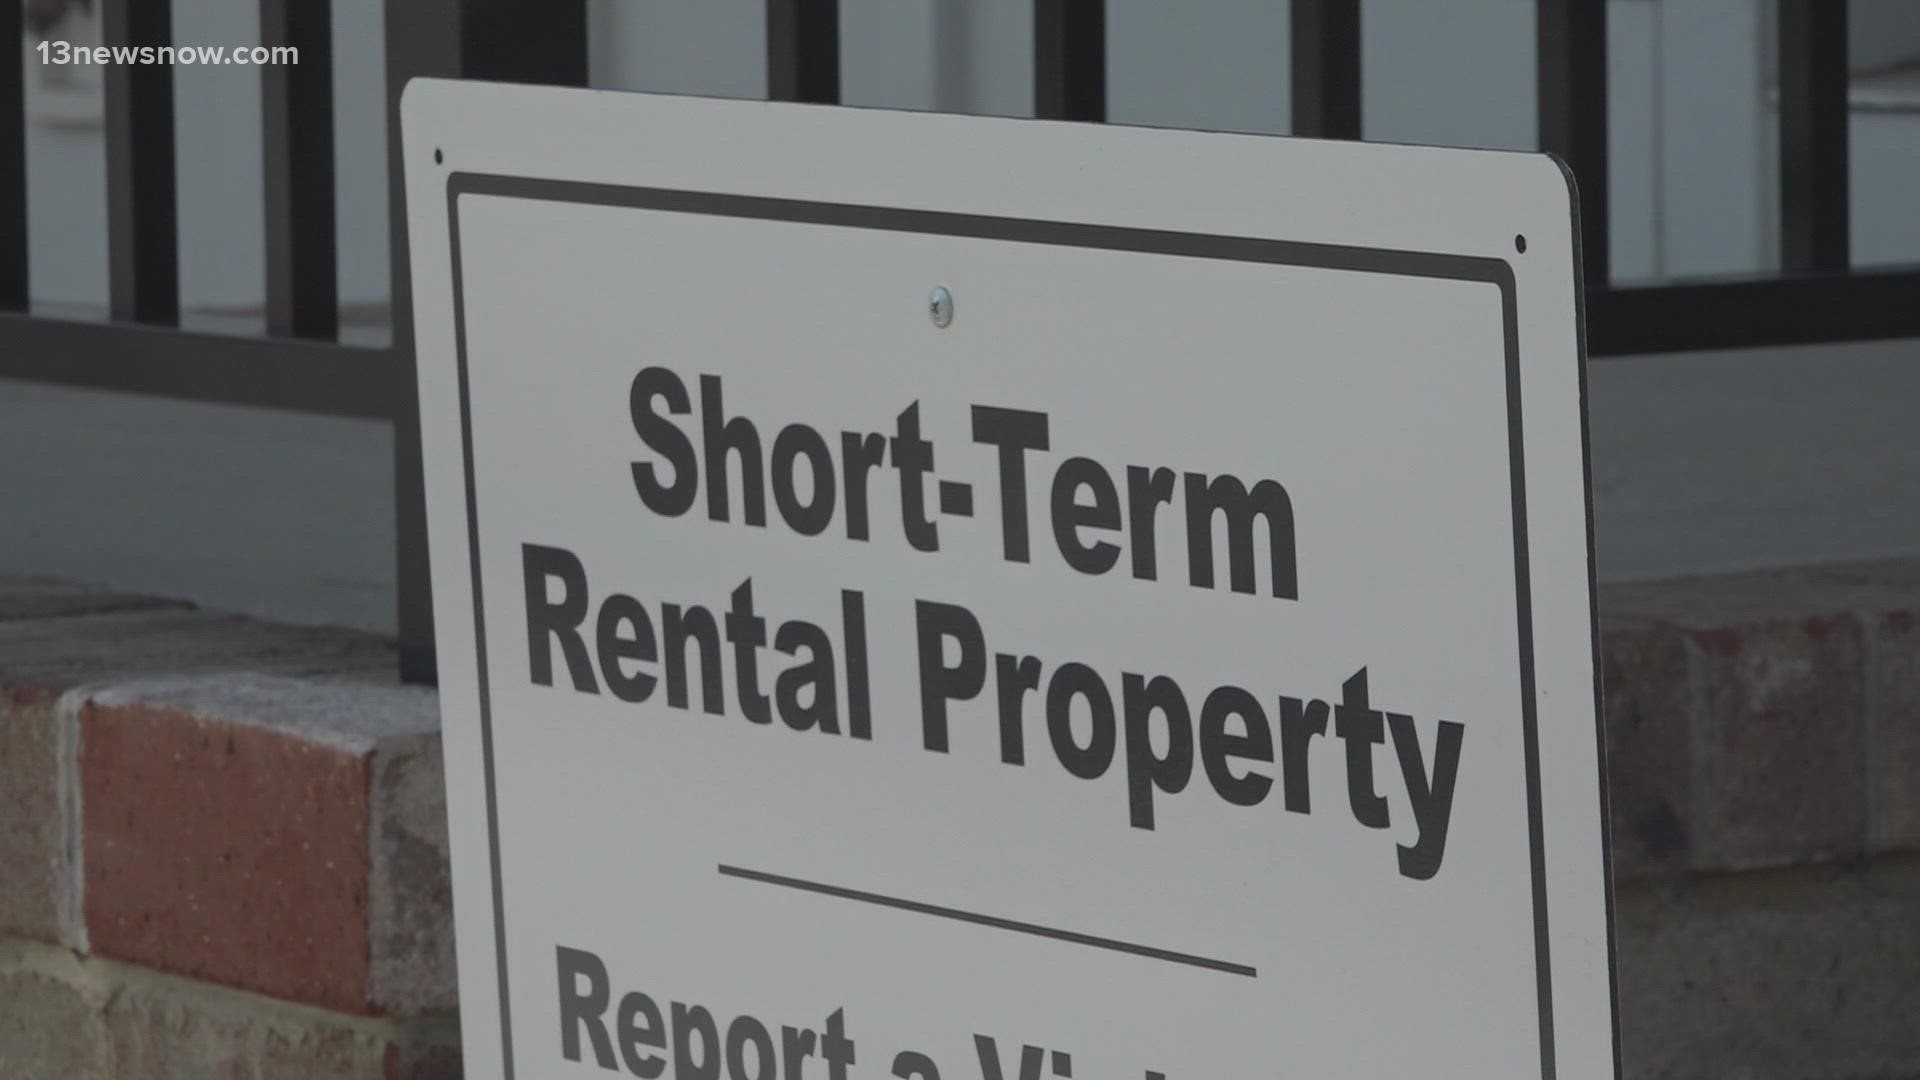 Senate Bill 1391, created by Sen. Lynwood Lewis, would take away some power from city leaders to regulate short-term rentals that Virginia realtors operate.